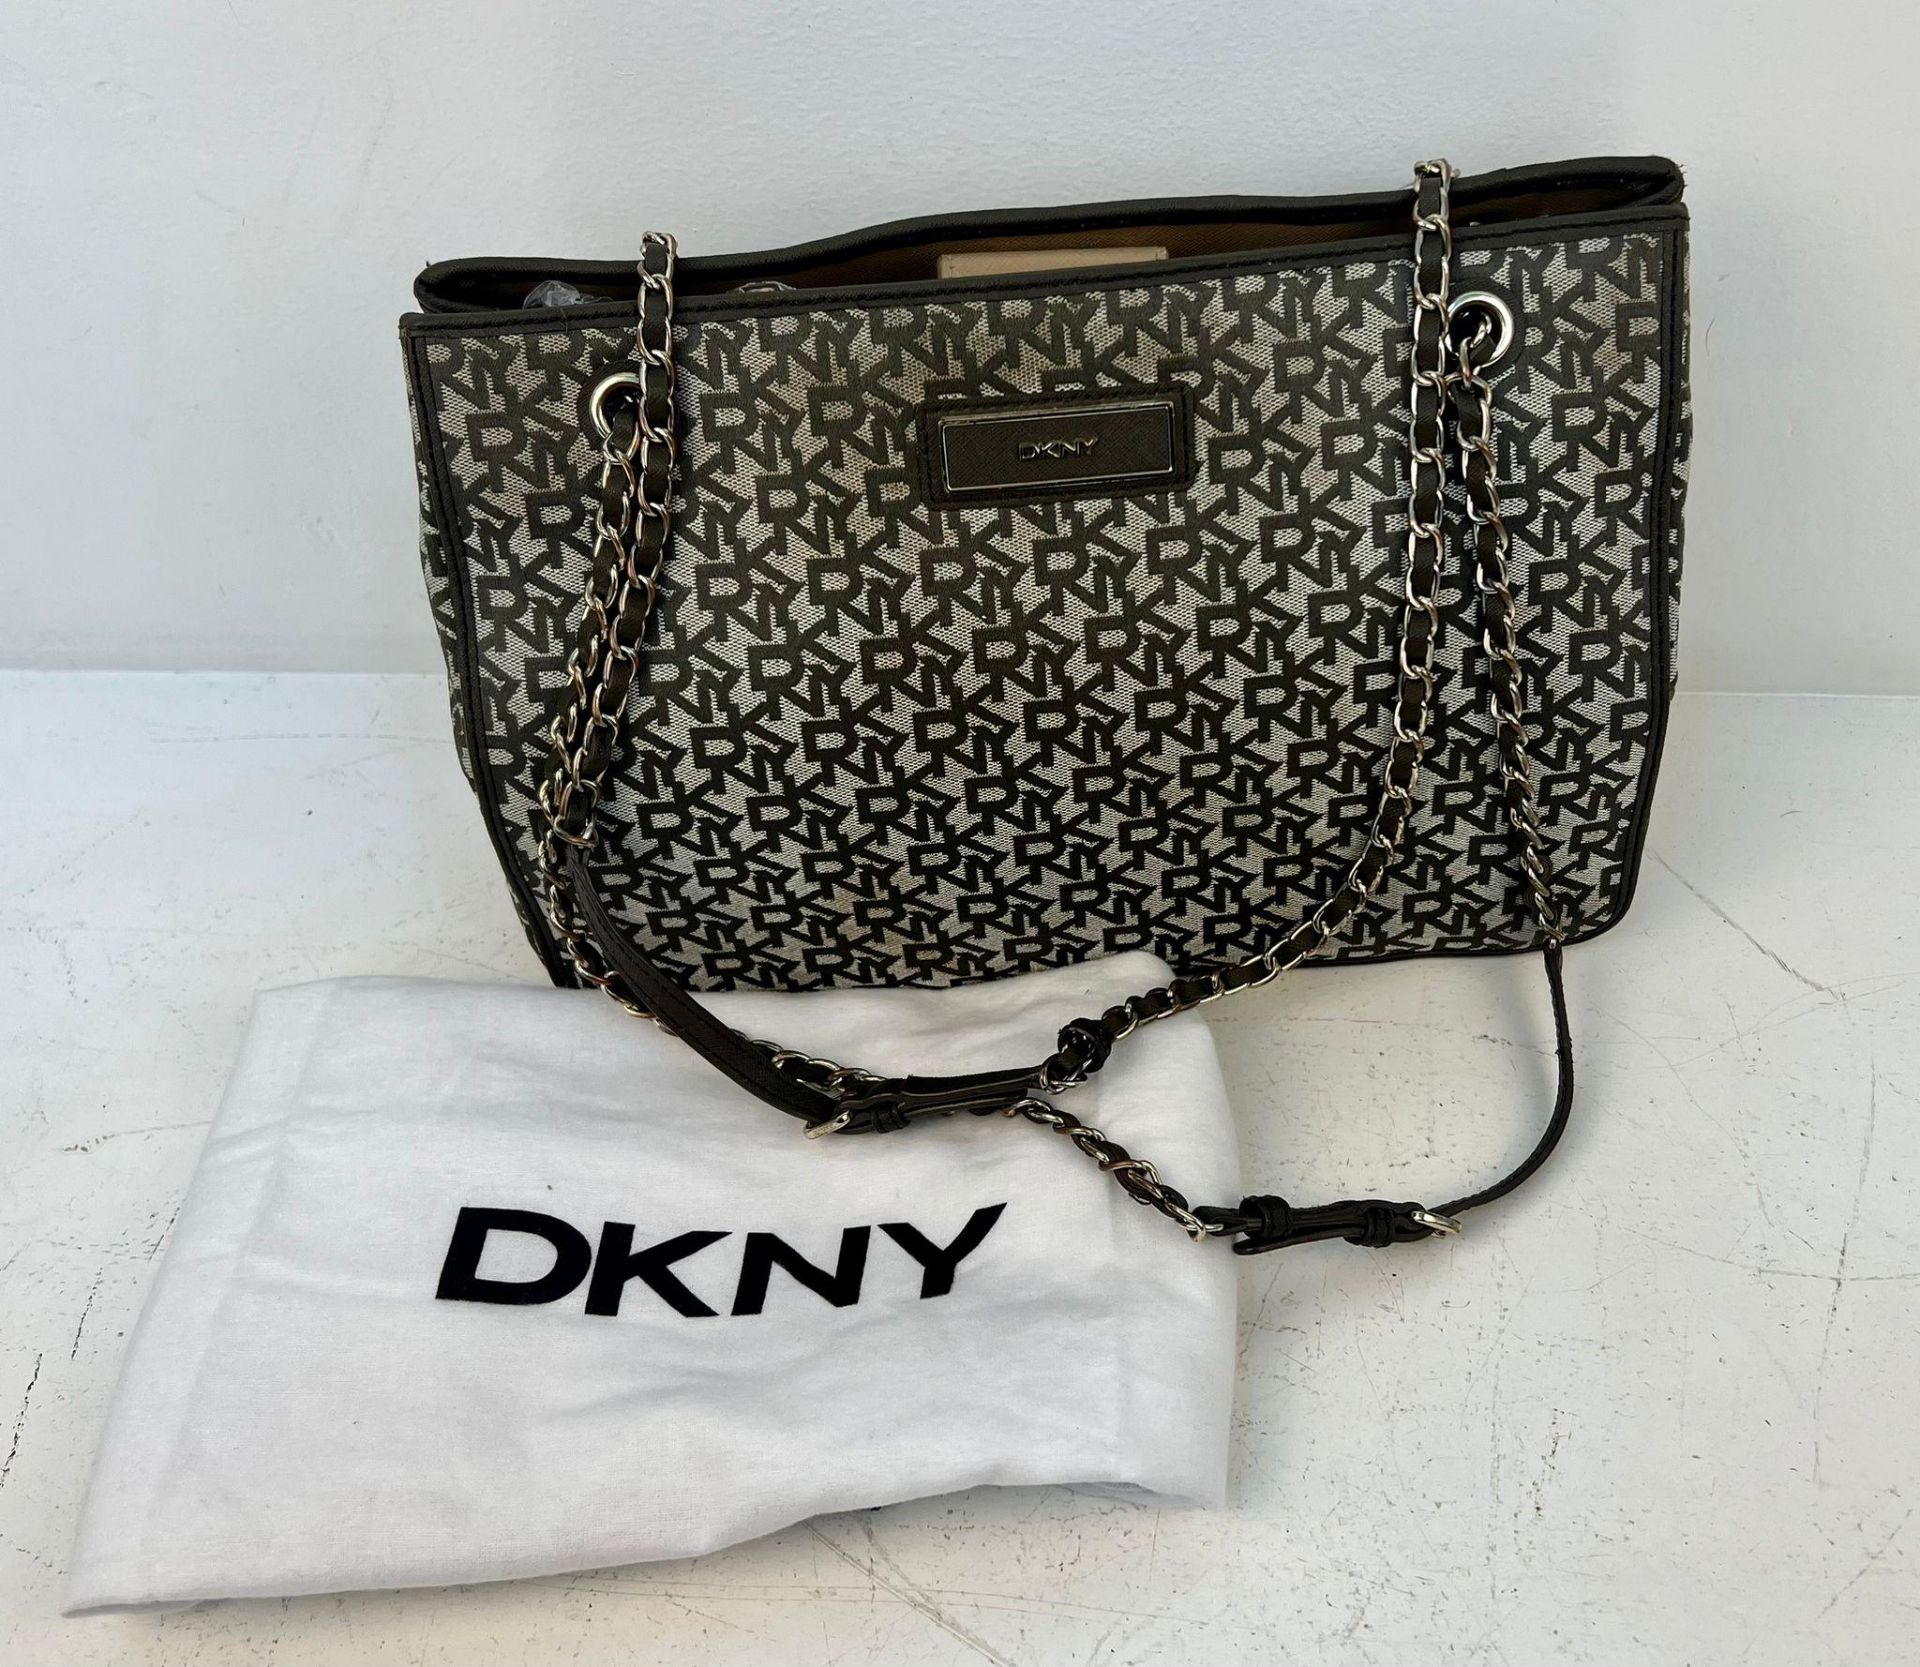 A DKNY Monogram Canvas Shoulder Bag with Dust-Cover. Spacious interior with zipped and open - Bild 2 aus 7